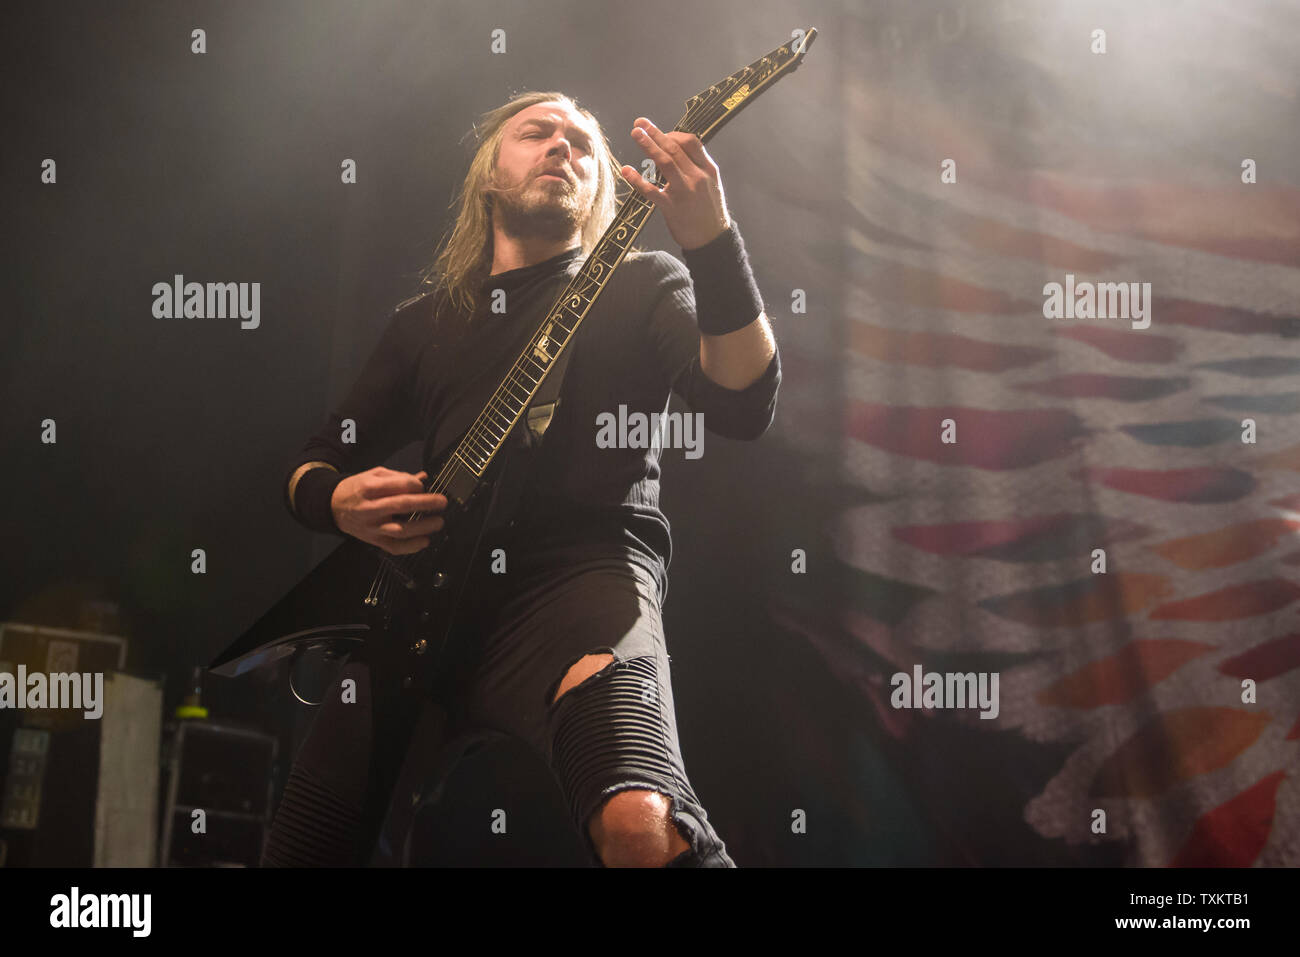 15.04.2019. RIGA, LATVIA. Michael Paget, lead guitarist of Welsh metalcore band Bullet For My Valentine, during performance at Palladium Riga. Stock Photo